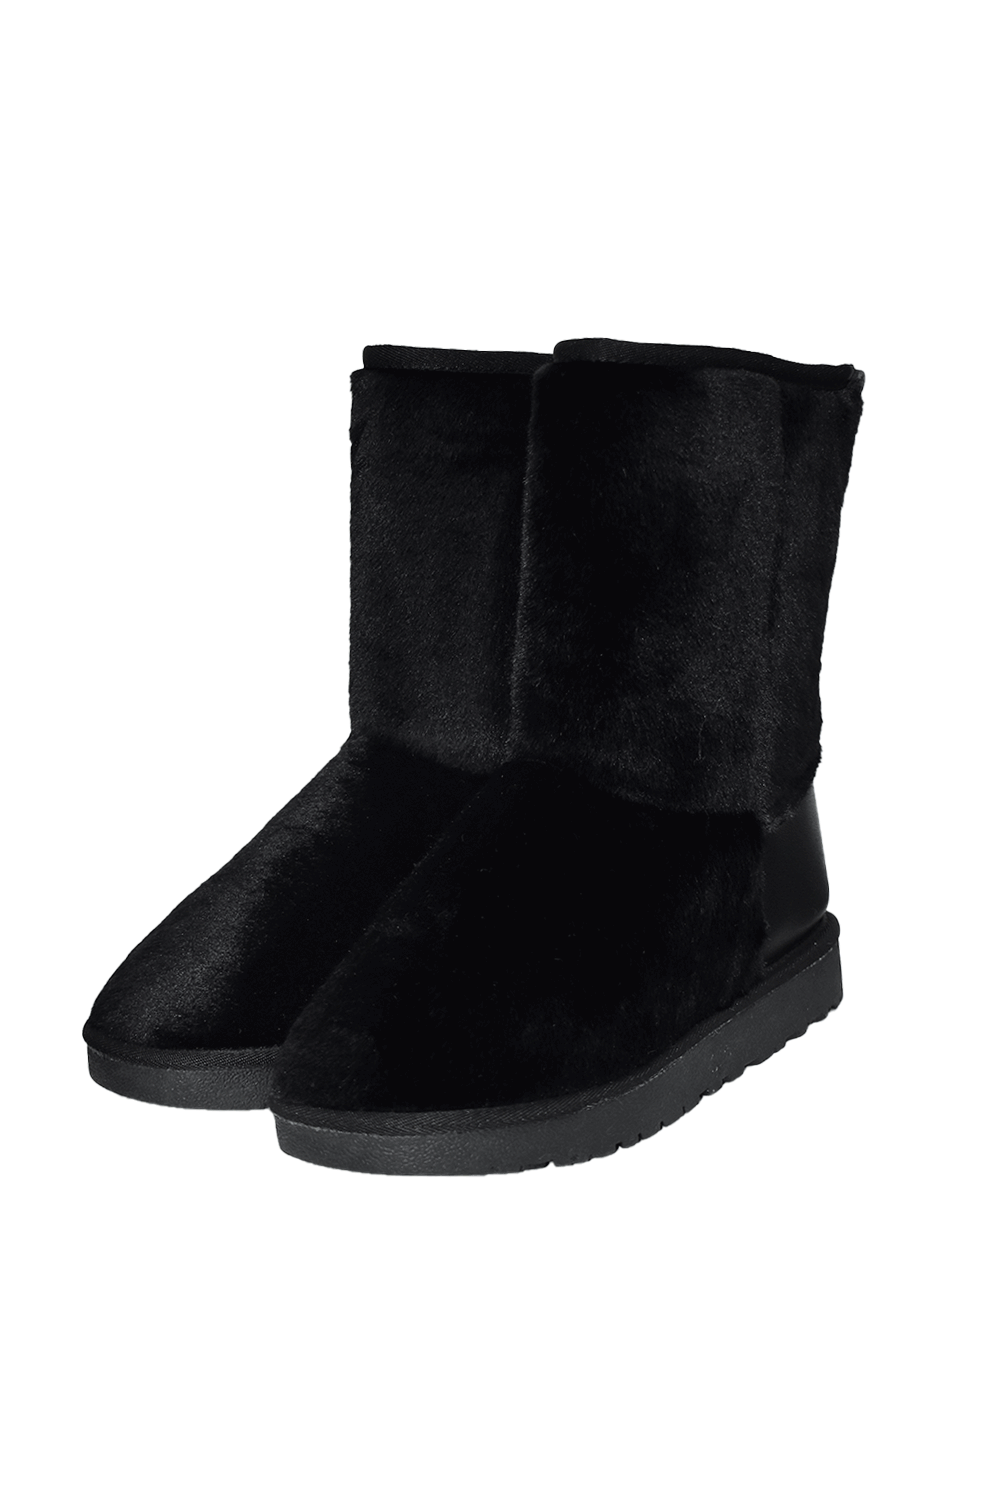 mellow ugg boots (2colors)